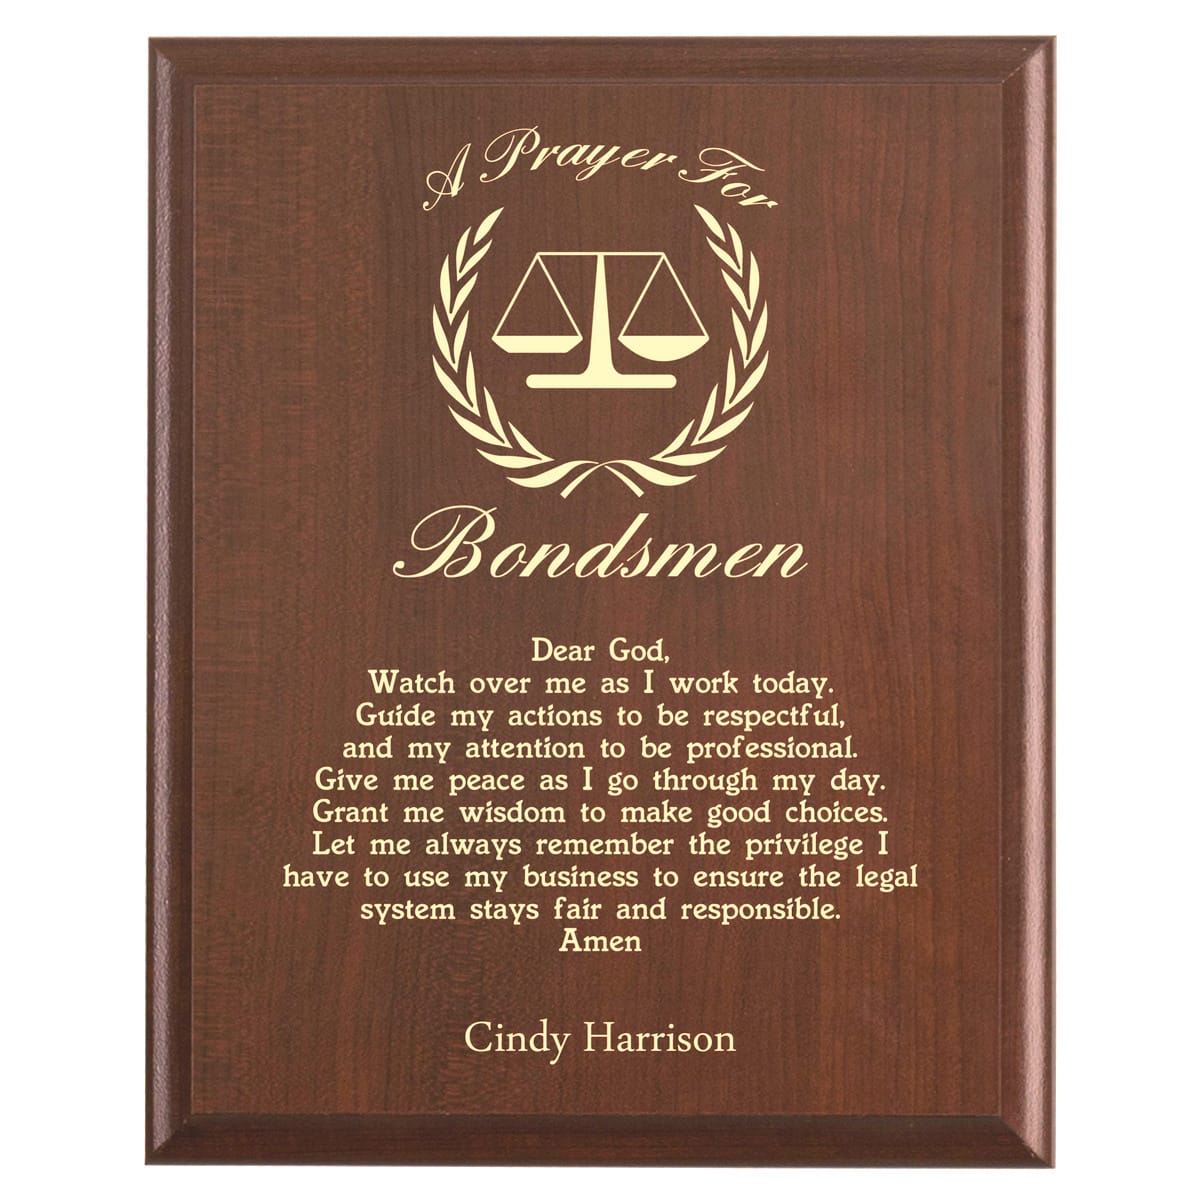 Plaque photo: Bail Bondsman Prayer Plaque design with free personalization. Wood style finish with customized text.